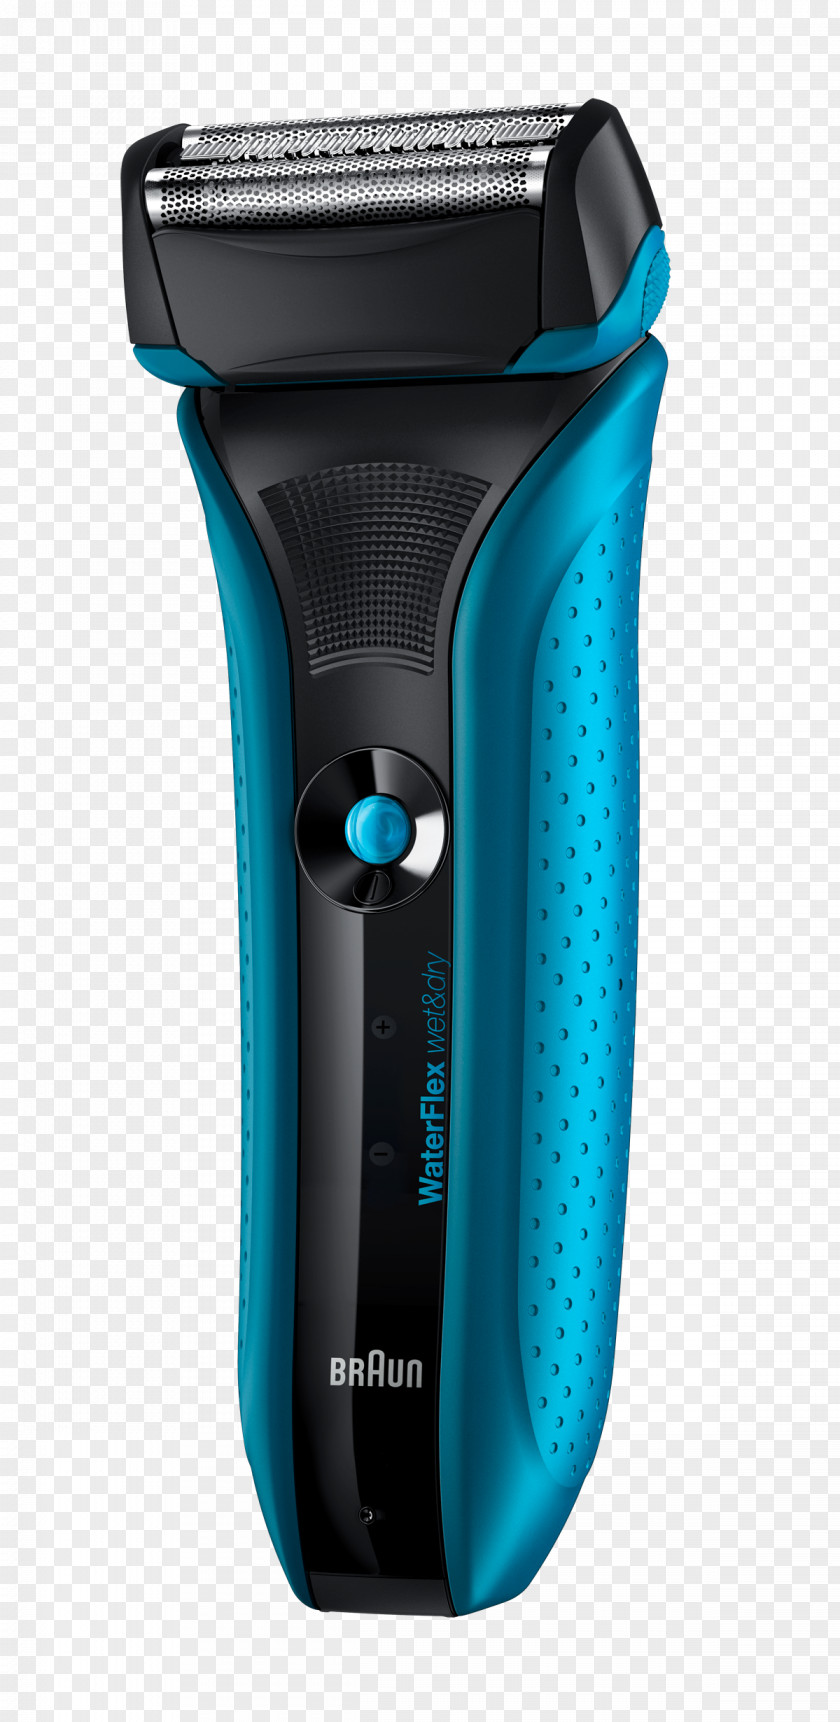 Congratulation Braun Waterflex WF2s 2S Wf Blue Wet & Dry Electric Razors Hair Trimmers Shaving PNG